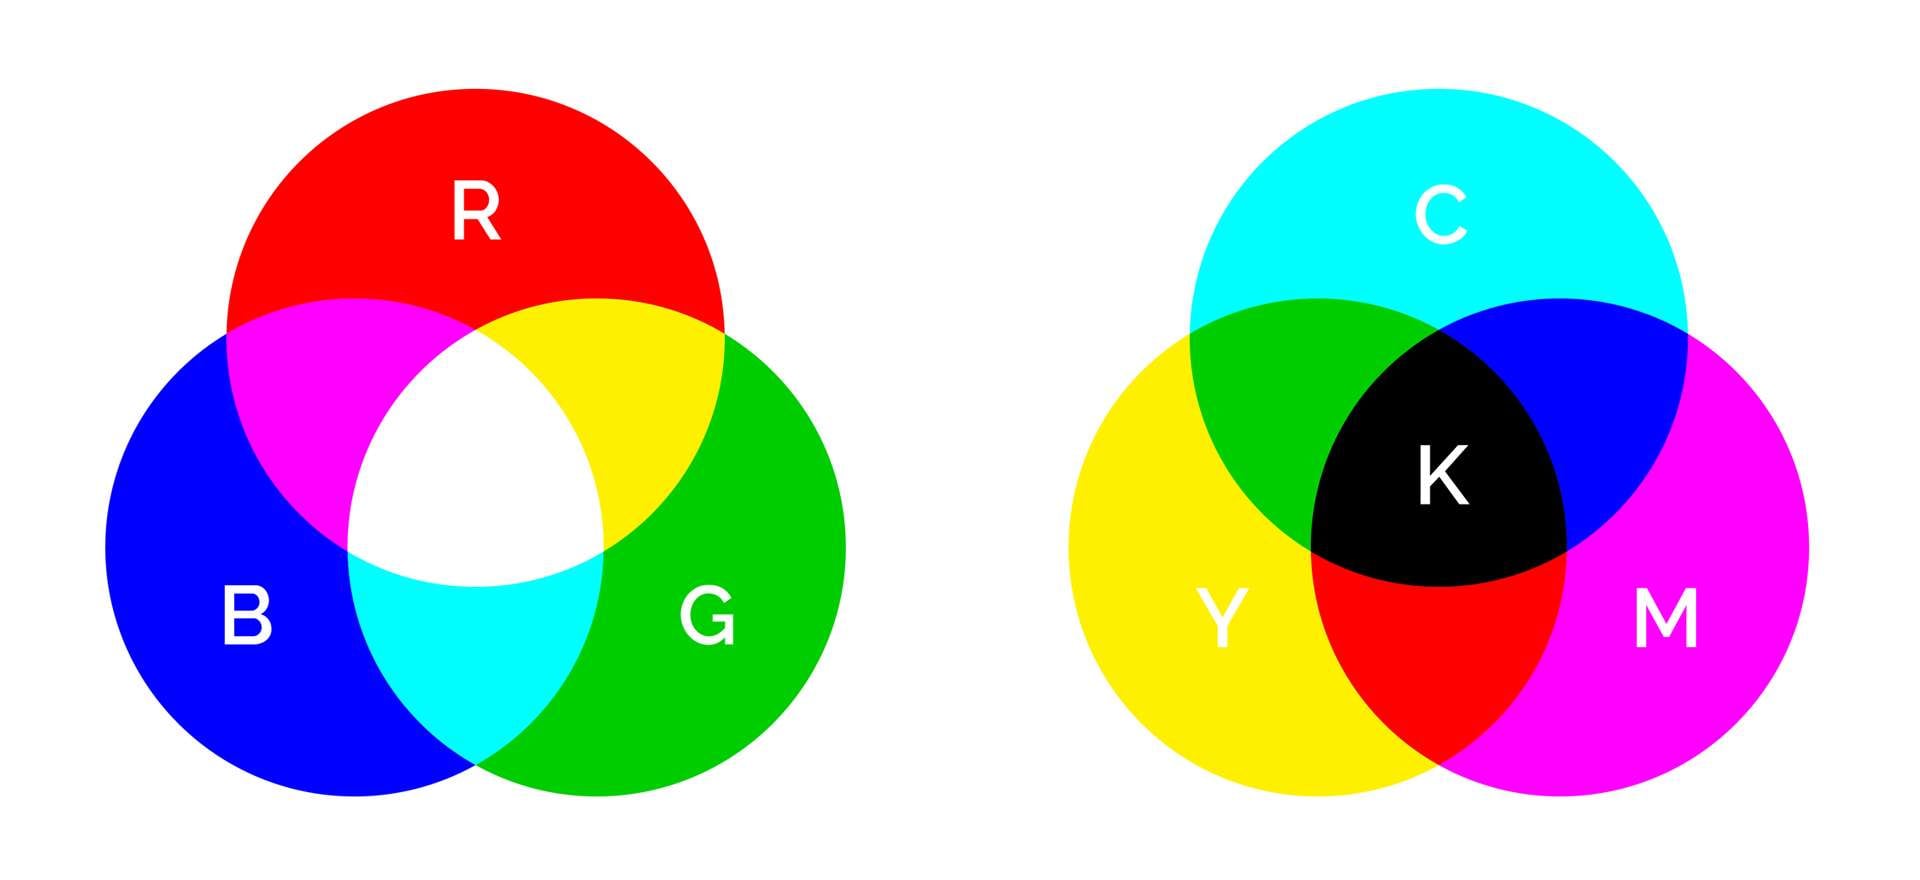 how to convert images to cmyk in photoshop for printing